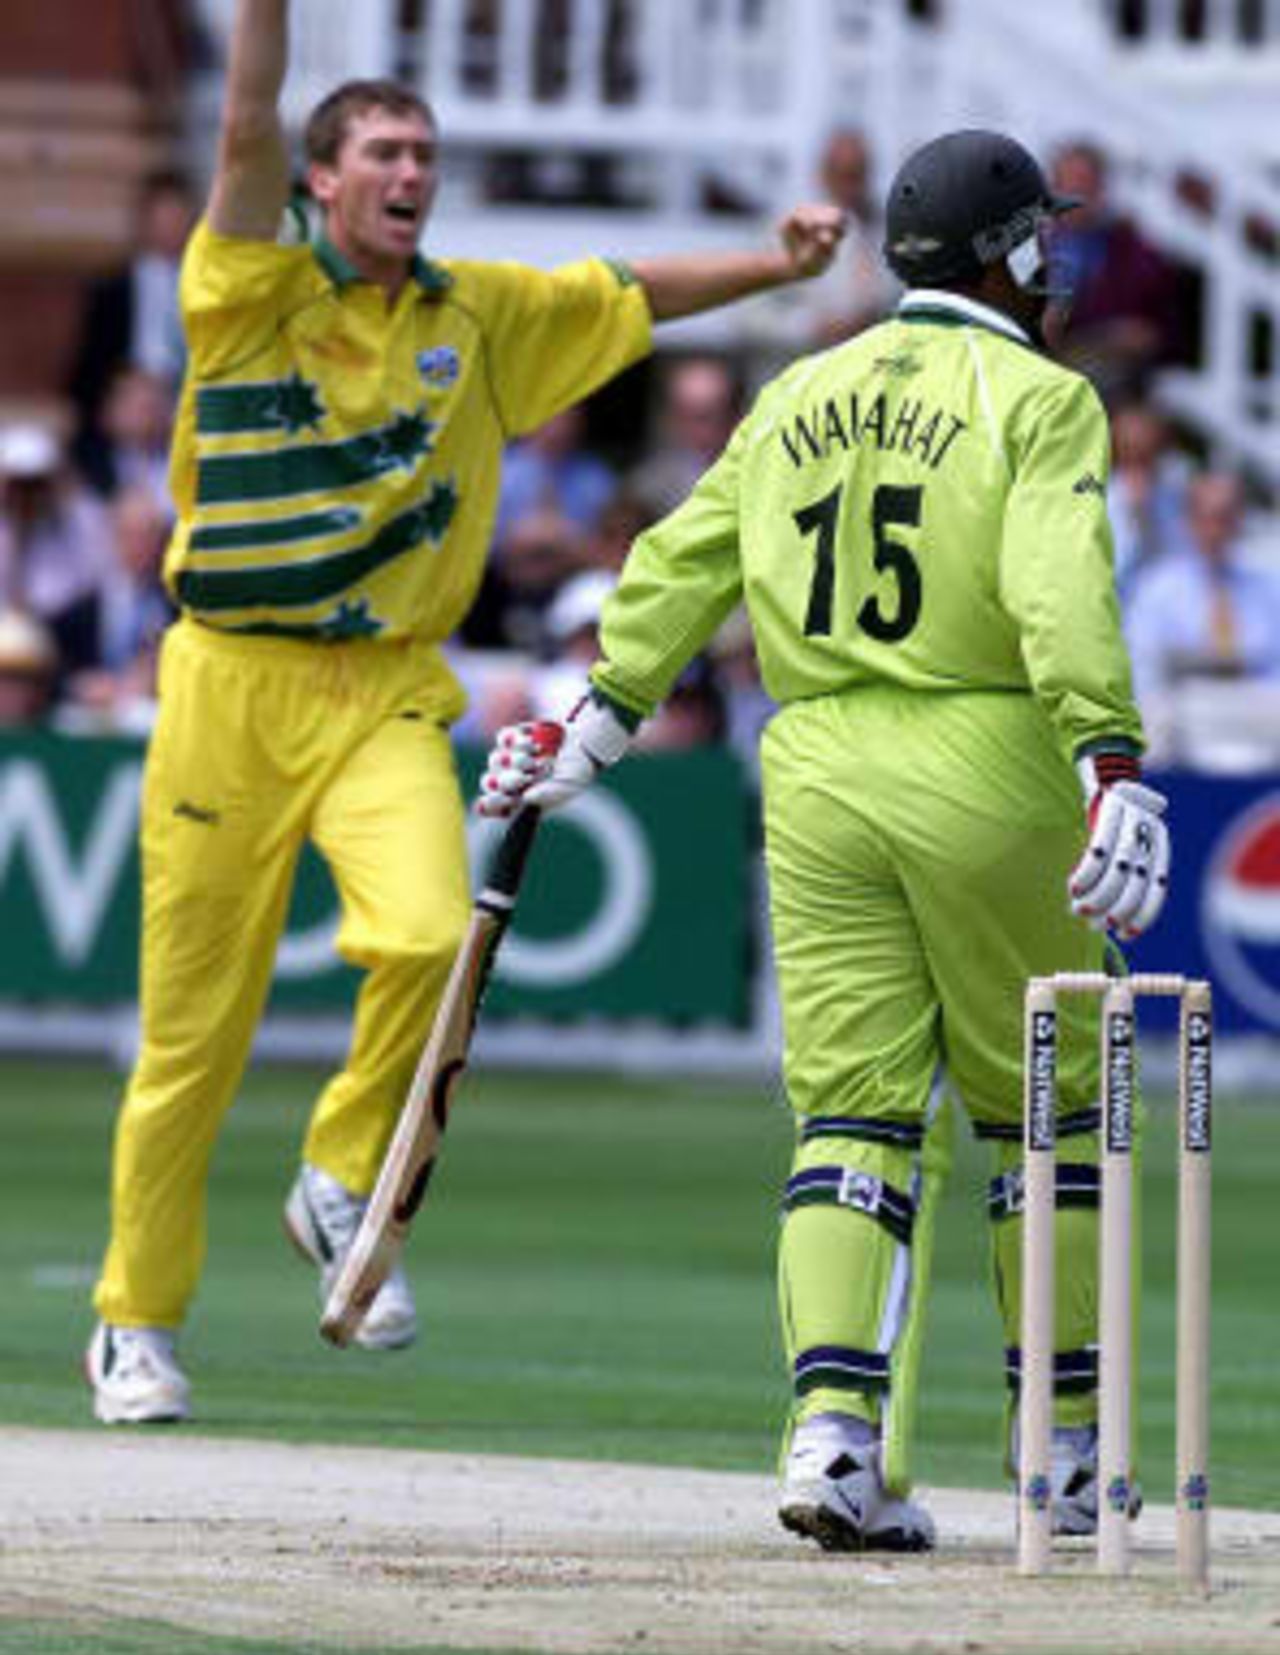 Glenn McGrath (L) of Australia celebrates taking the wicket of Wajahatullah Wasti who was caught by Australian Mark Waugh in the slips during the World Cup Cricket Final against Pakistan 20 June 1999 at Lords in London